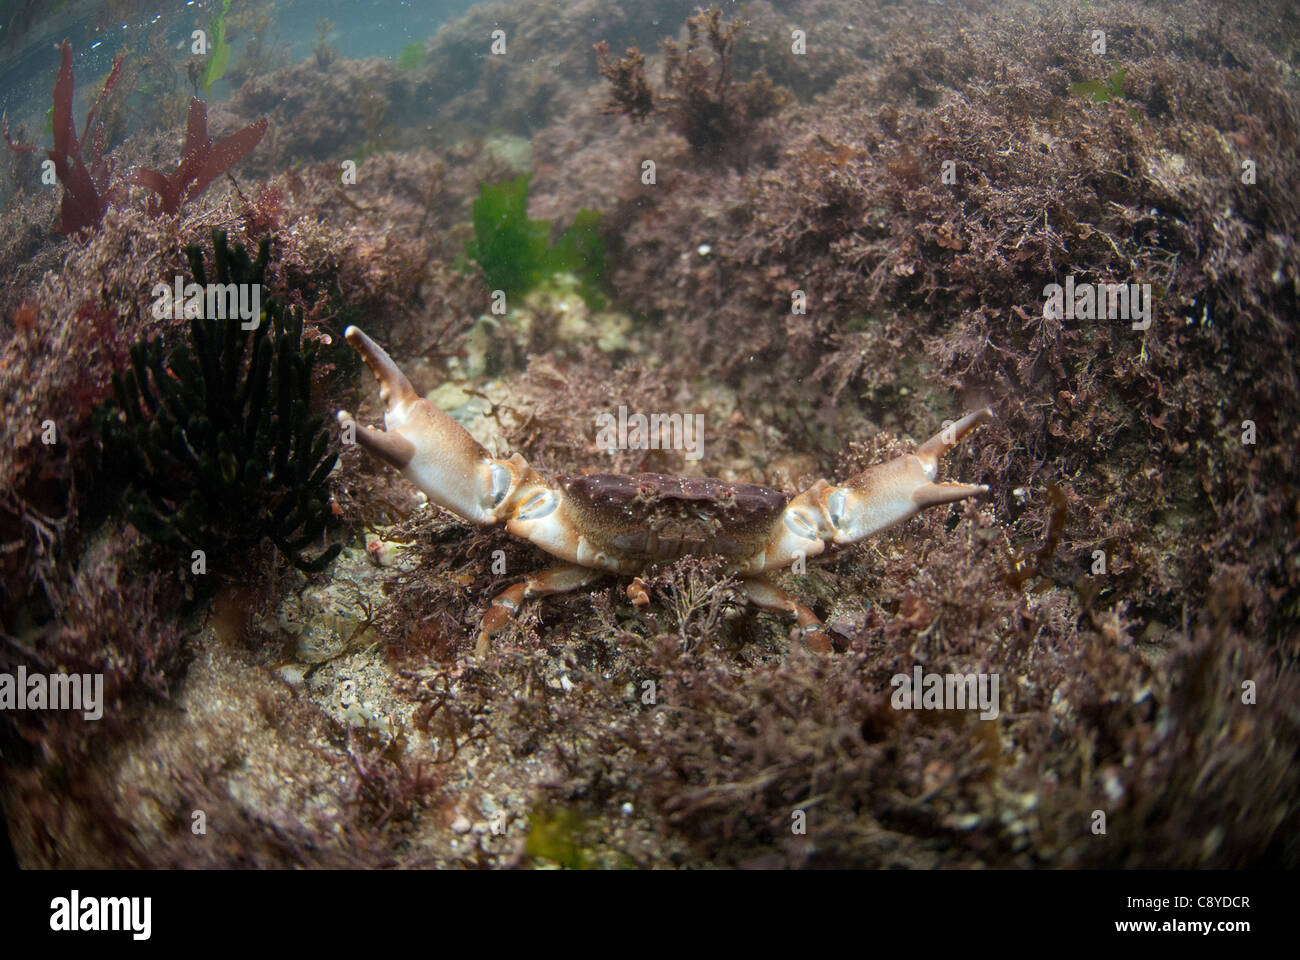 montugu, risso or furrowed crab displaying in a rockpool Stock Photo